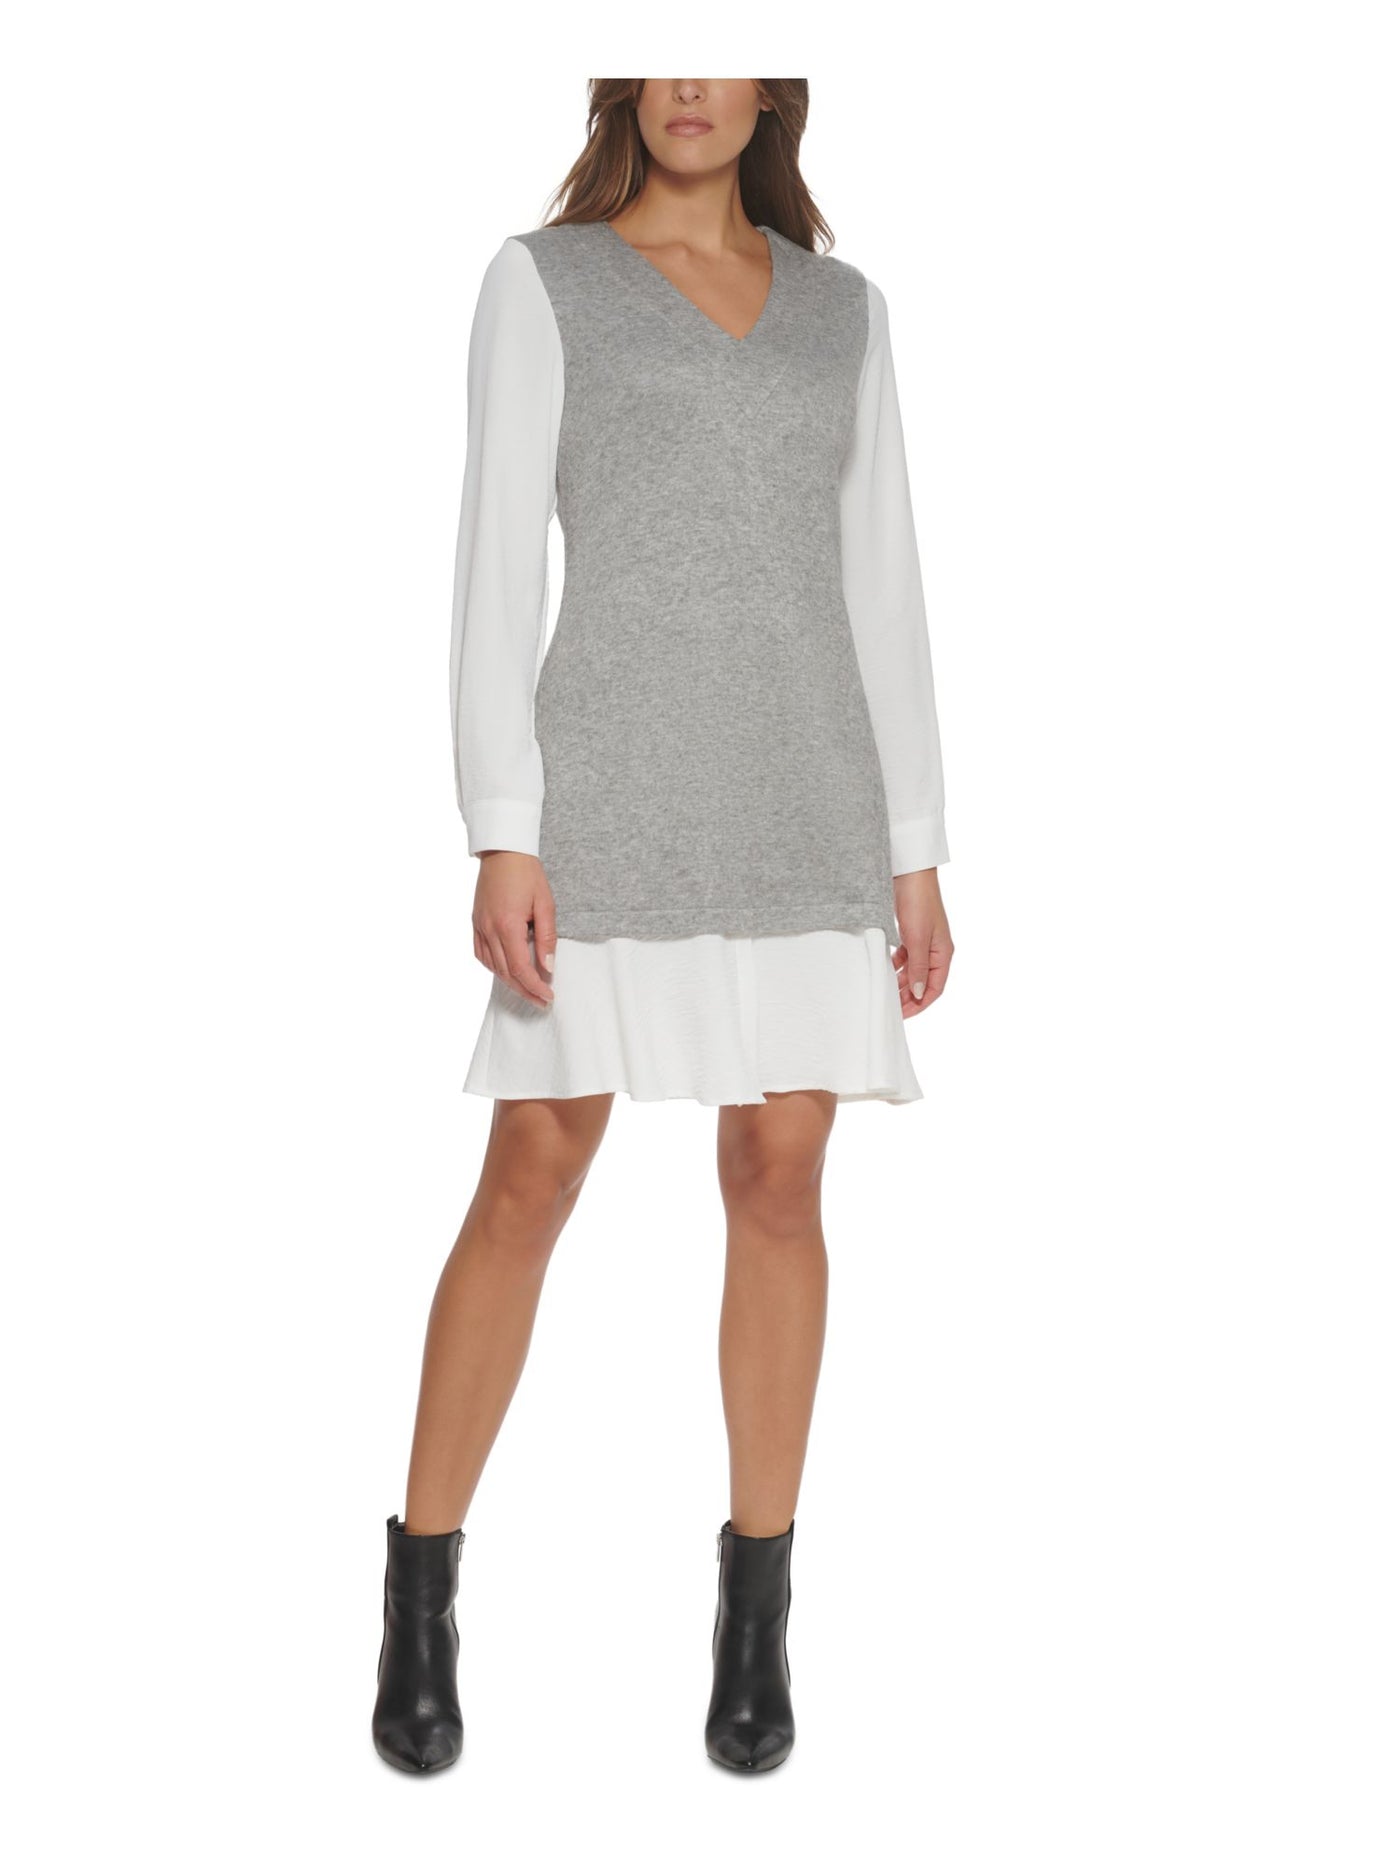 DKNY Womens Gray Heather Cuffed Sleeve V Neck Above The Knee Wear To Work Sweater Dress L